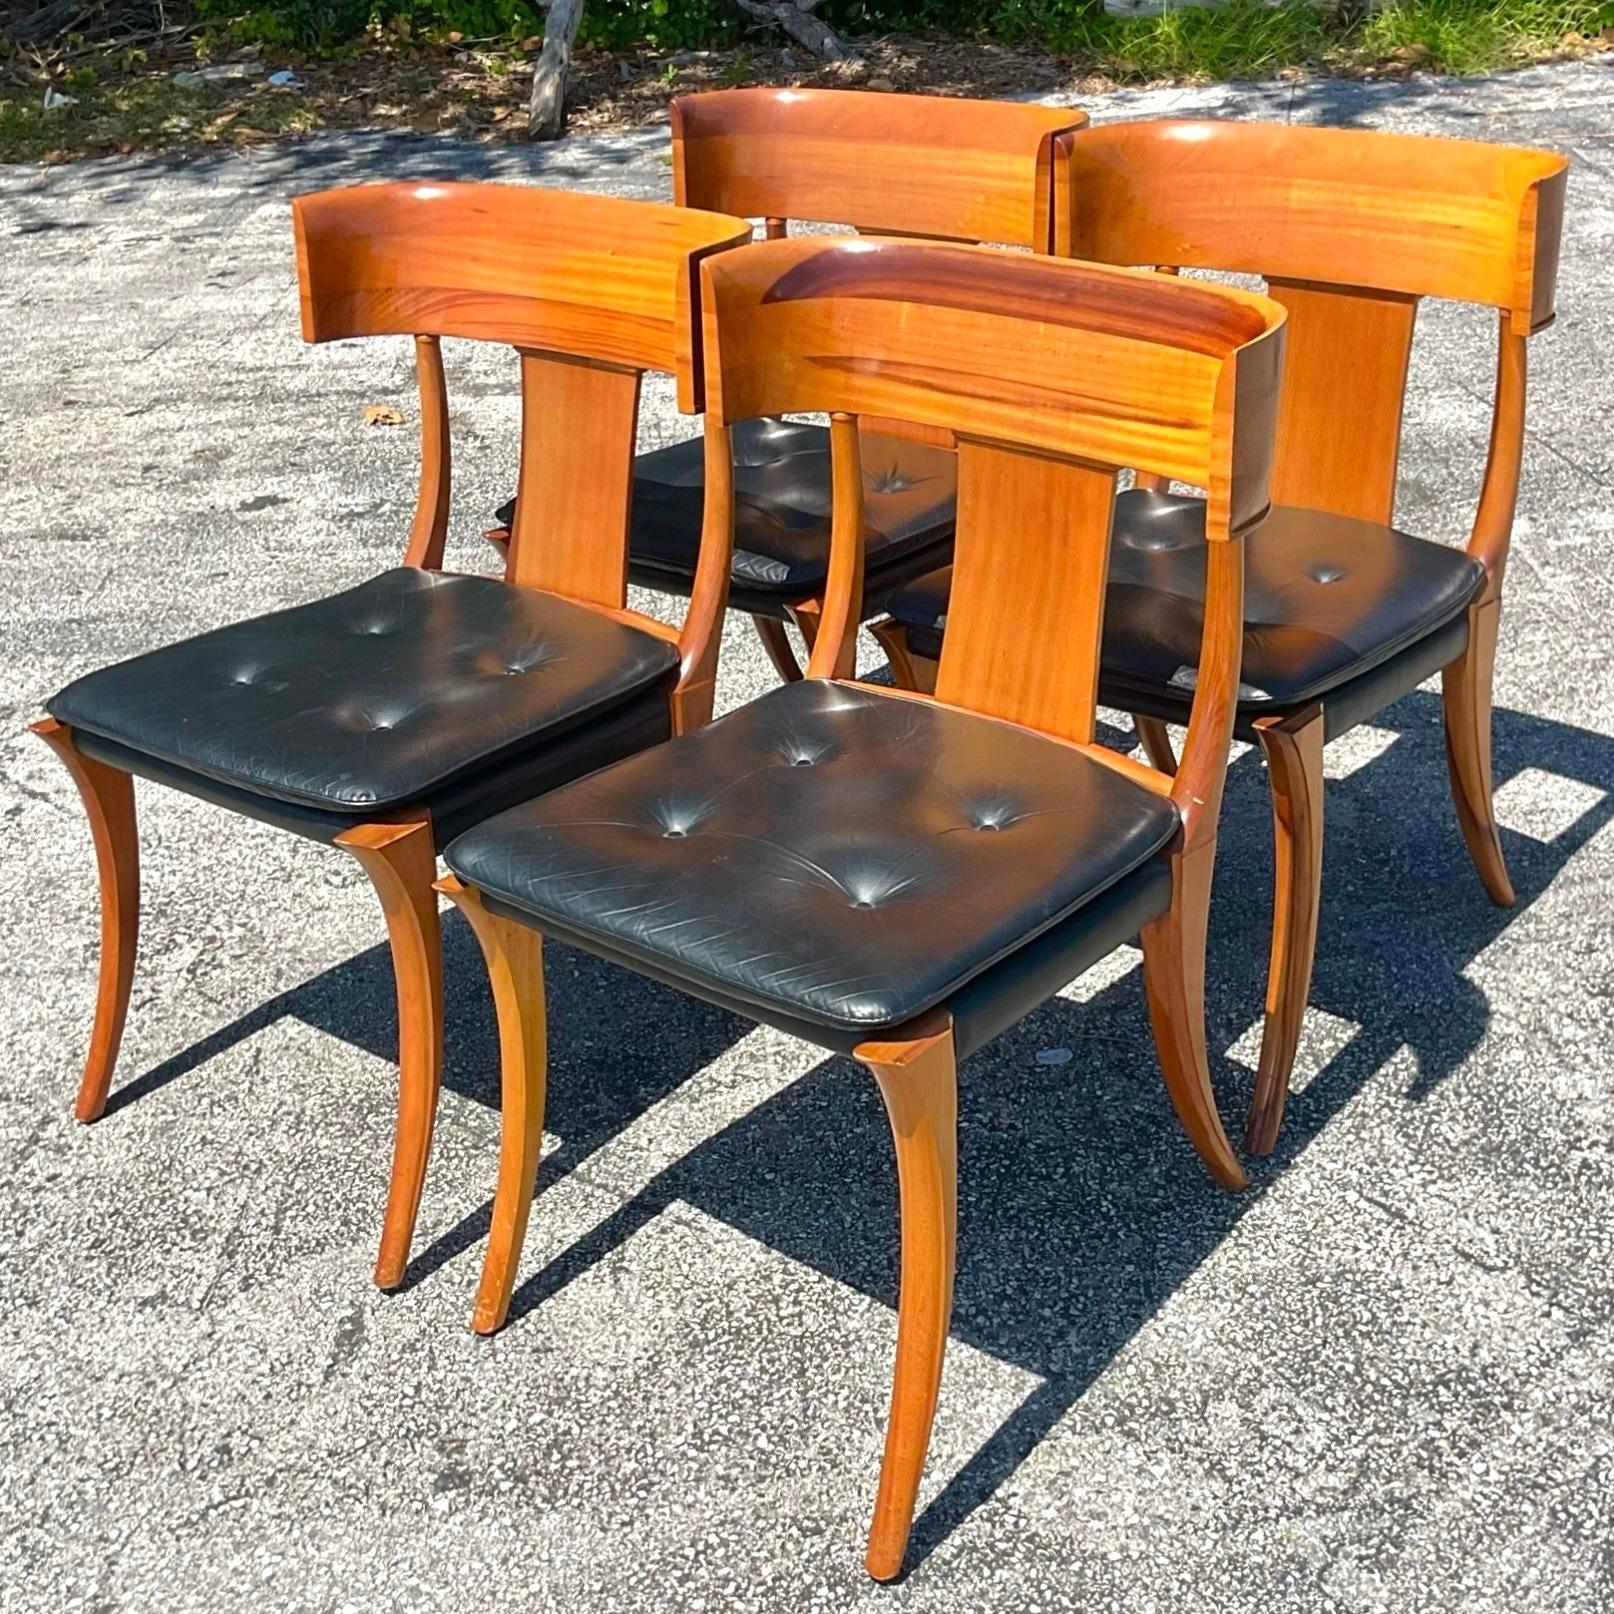 Vintage Neoclassical Klismos Dining Chairs After Kipp Stuart - Set of 4 For Sale 3